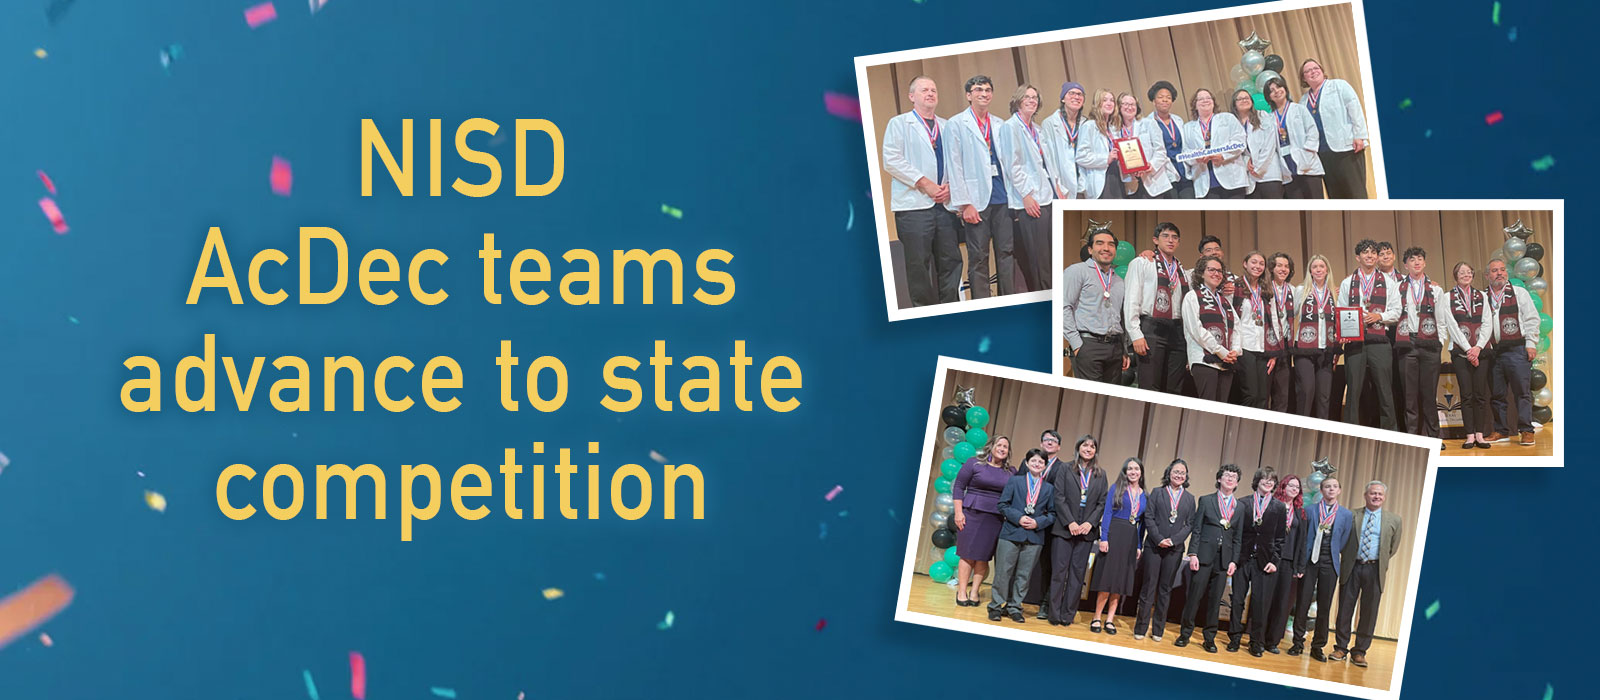 NISD AcDec teams advance to state competition